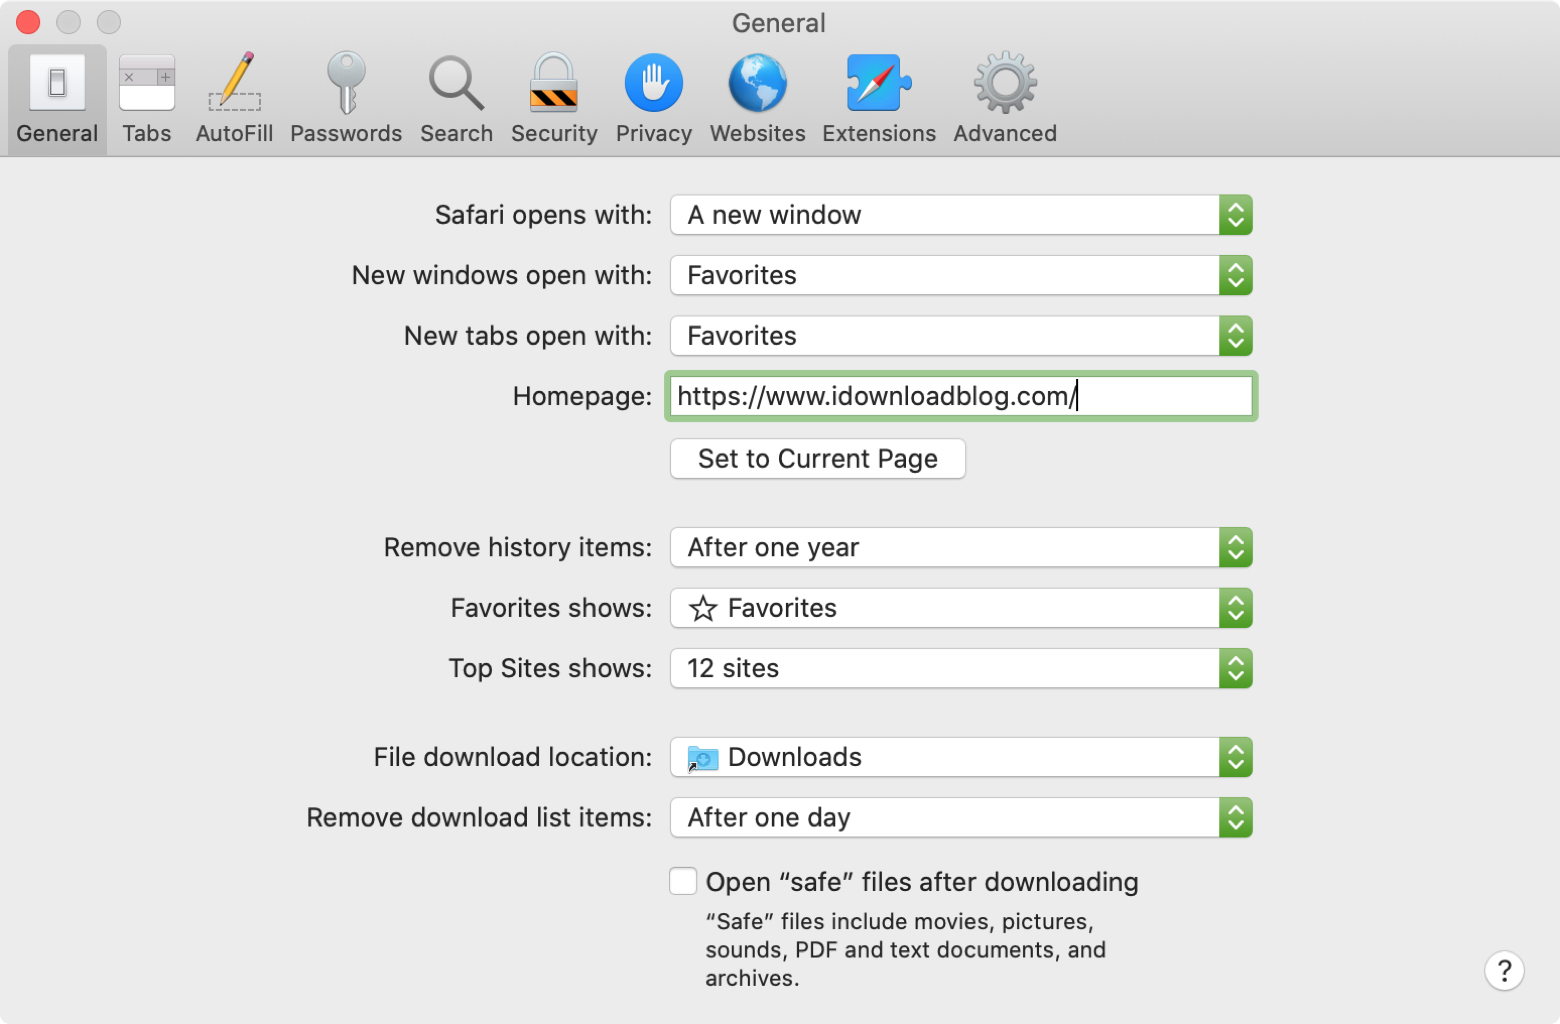 Open your web browser's settings or preferences.
Look for the "Extensions" or "Add-ons" section.